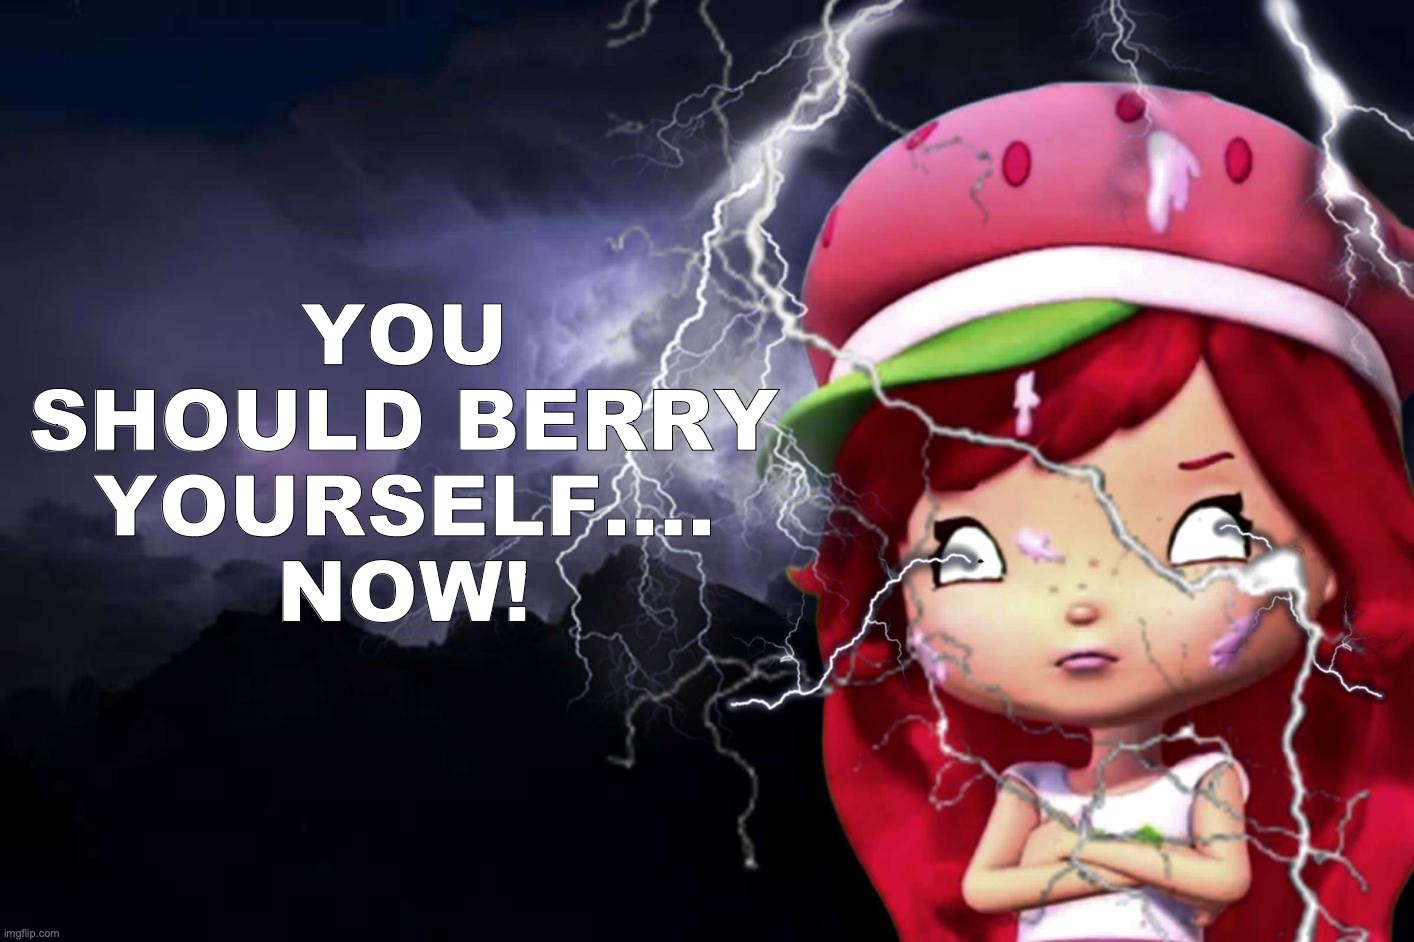 You should Berry yourself...now!! | YOU SHOULD BERRY YOURSELF....
NOW! | image tagged in memes,dark humor,funny,strawberry shortcake,you should kill yourself now | made w/ Imgflip meme maker